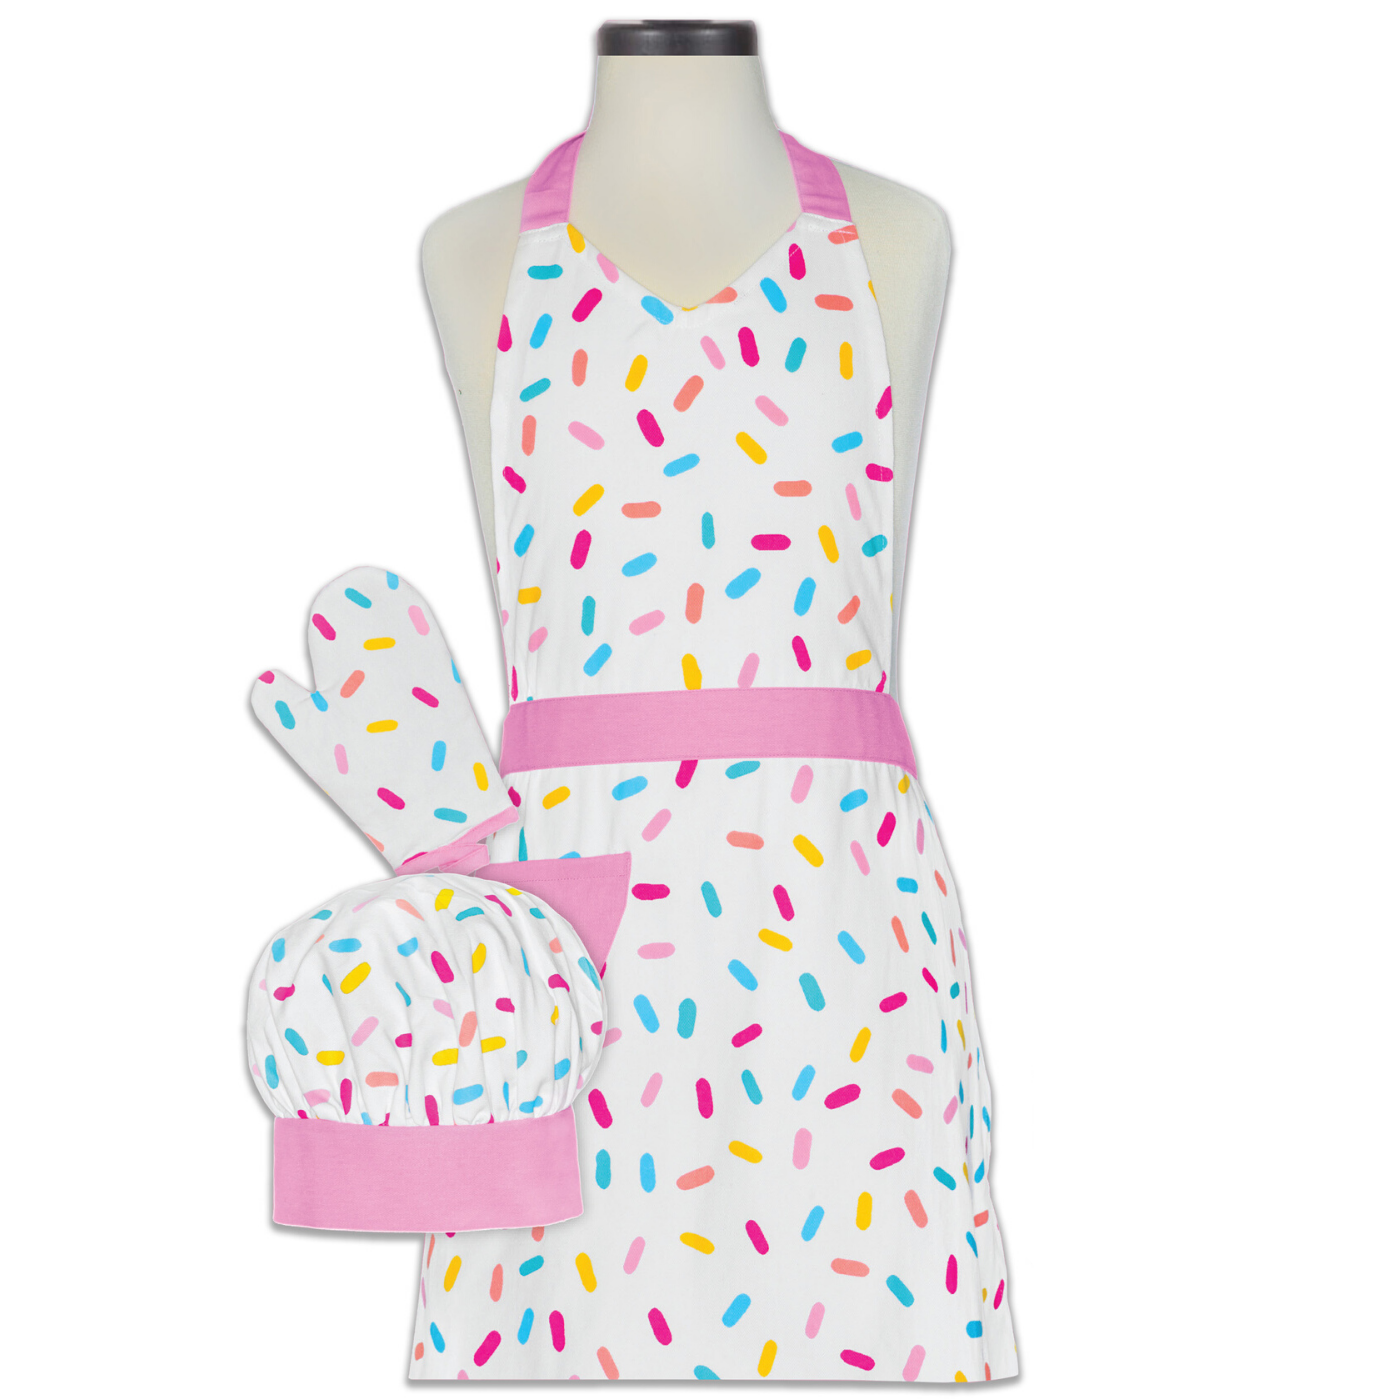 Sprinkle Printed Childs Cooking Kit with Apron Chef Hat and Oven Mitt